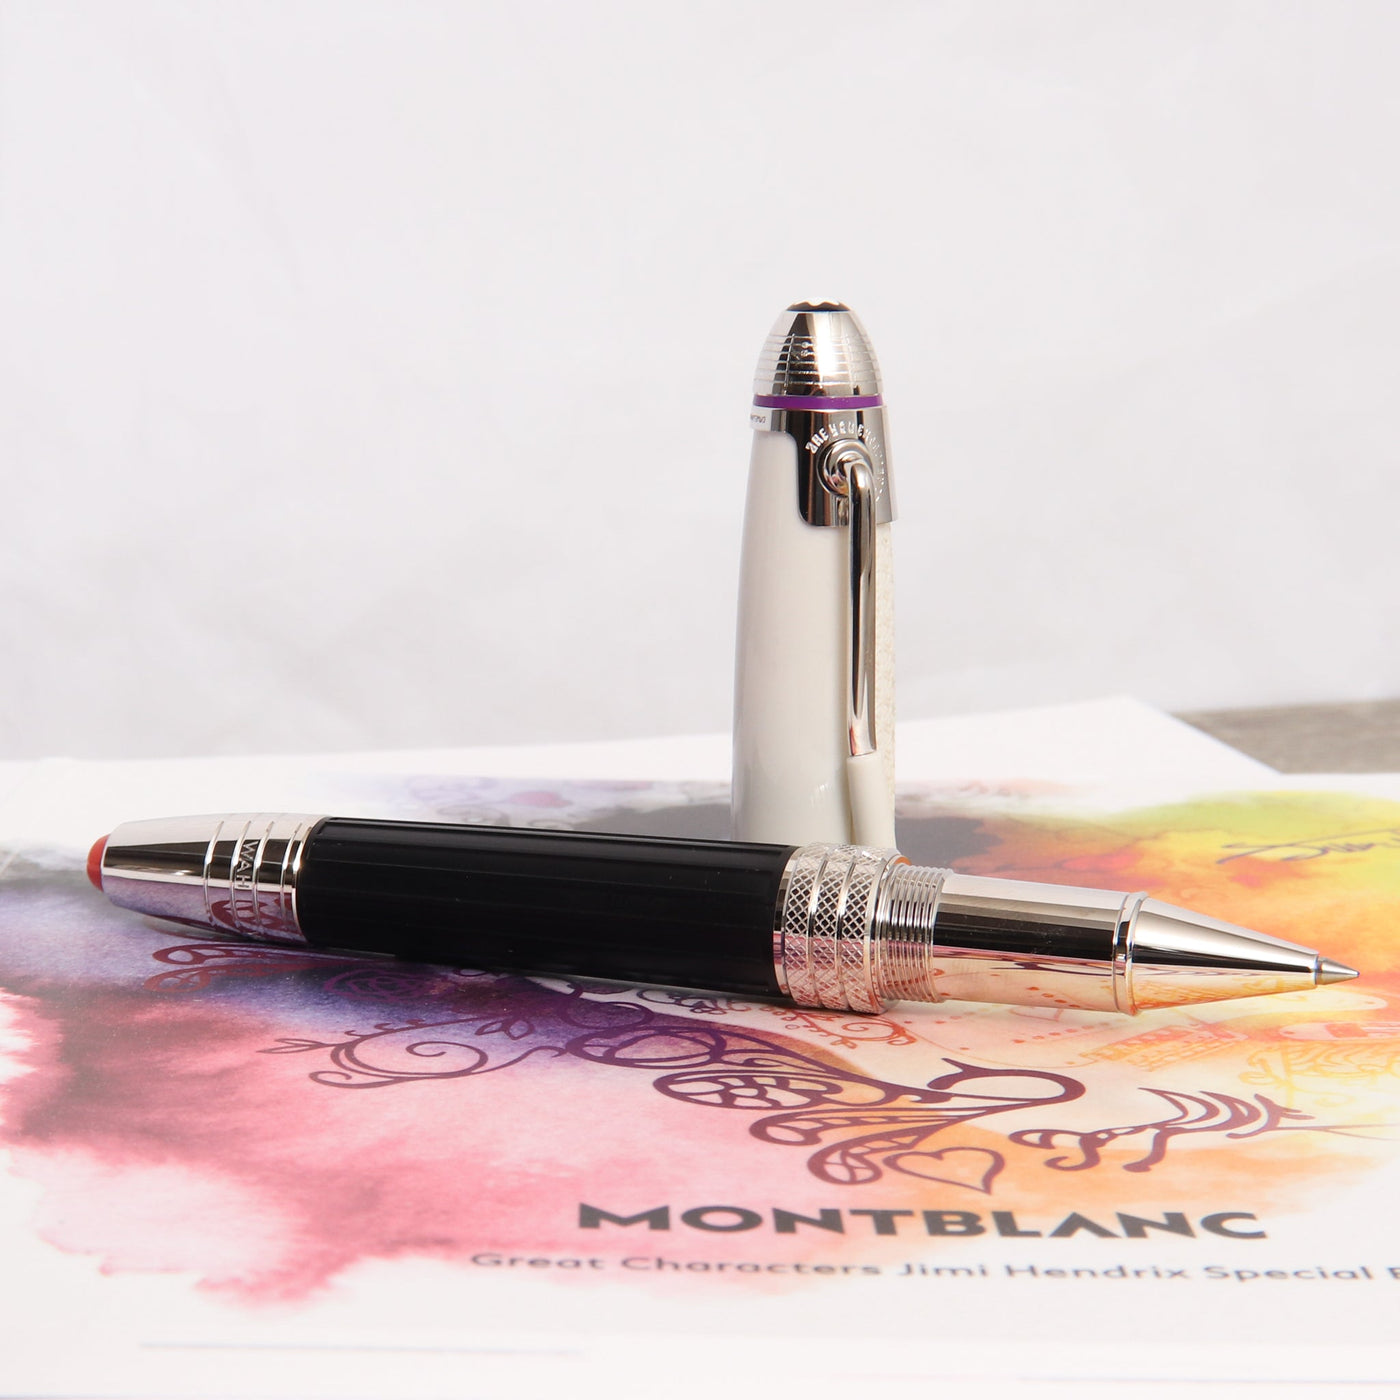 Montblanc Great Characters Jimi Hendrix Rollerball Pen Uncapped